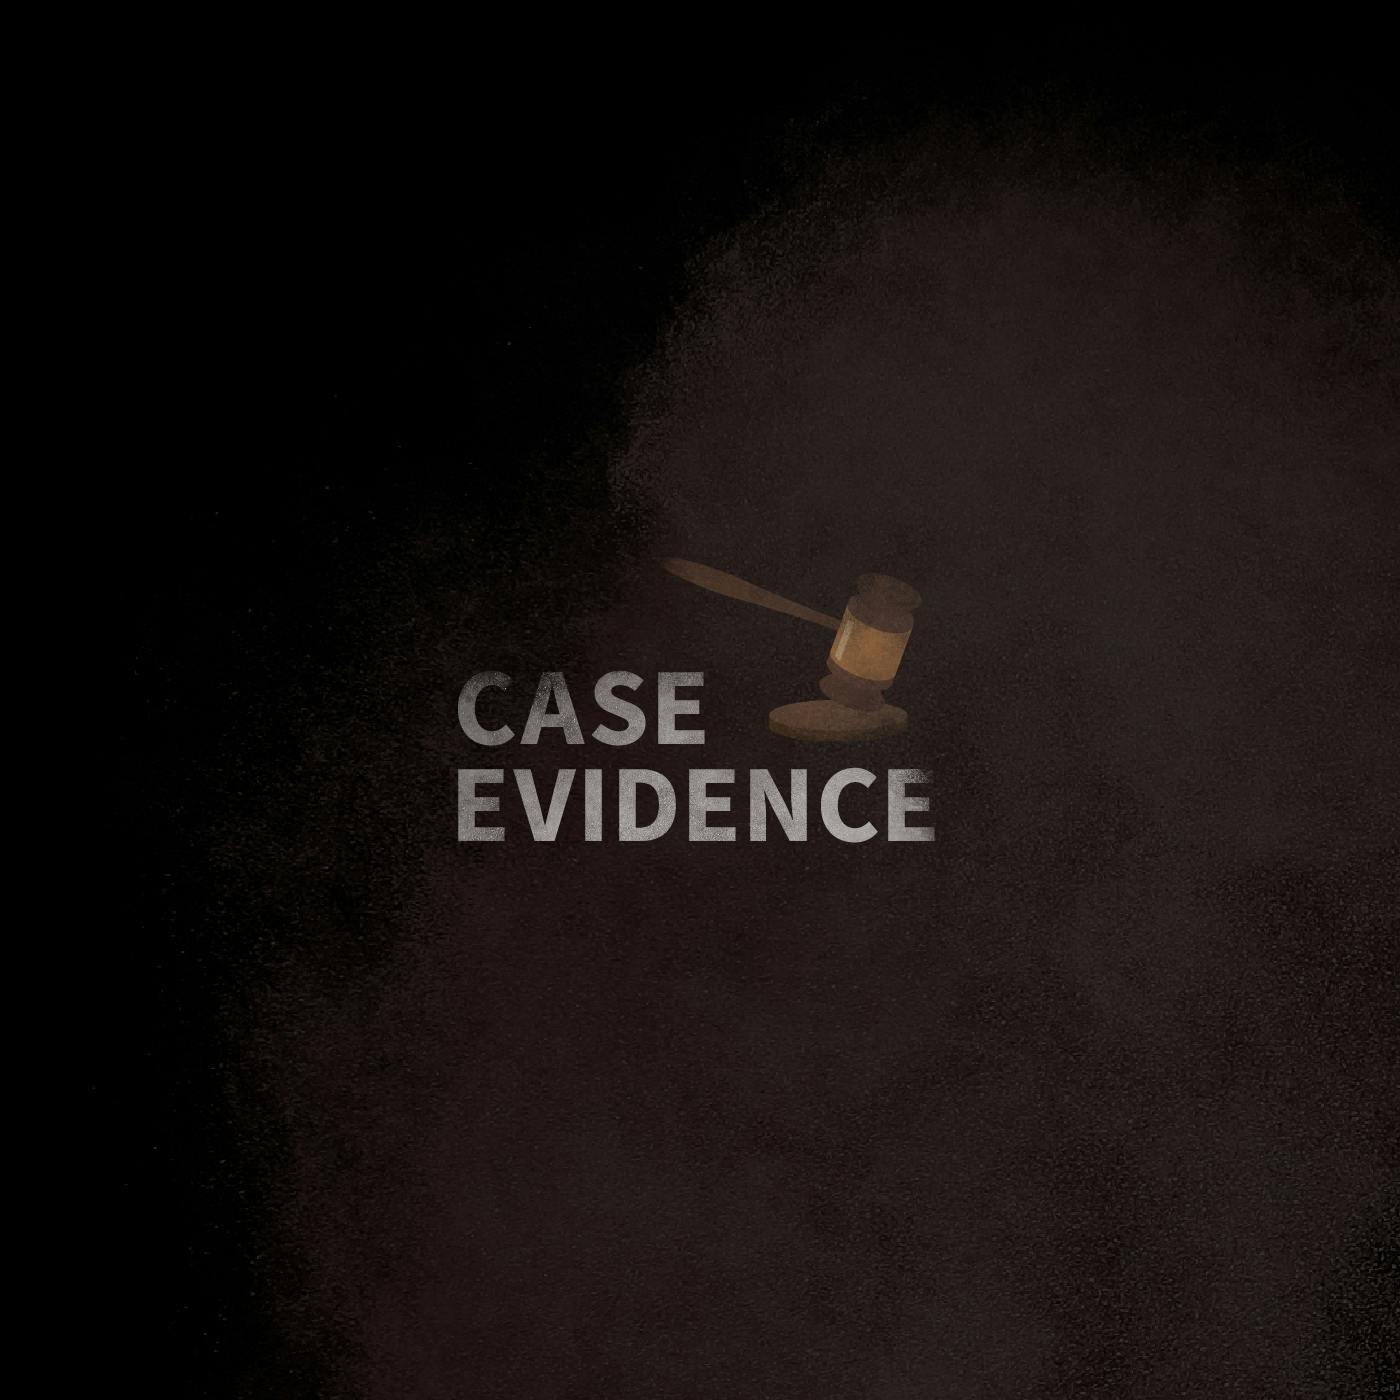 Case Evidence 01.23.17 by Tenderfoot TV